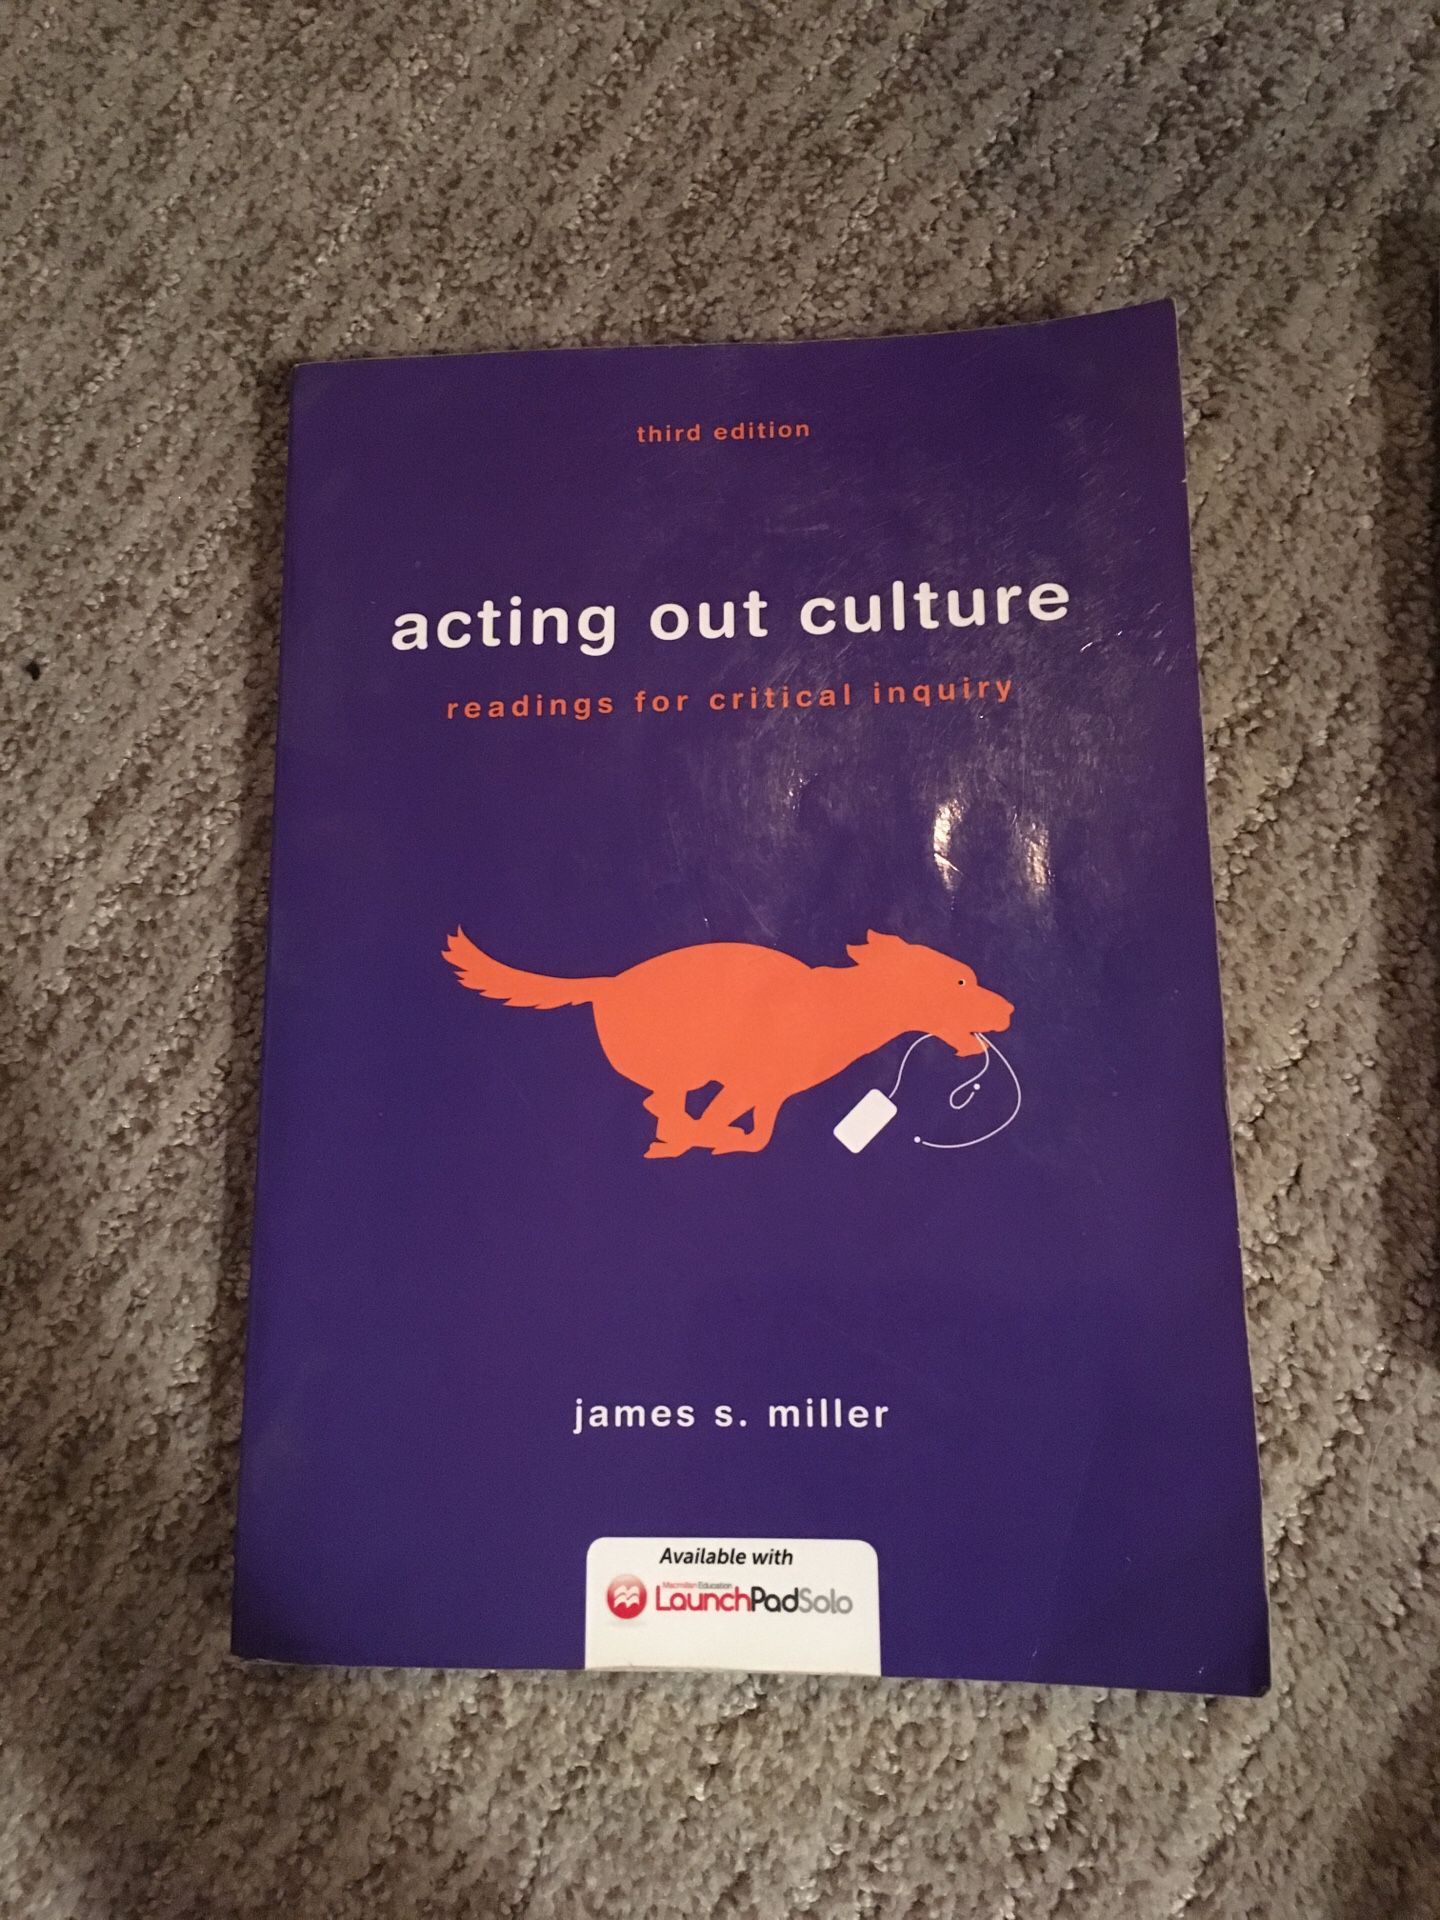 Acting out culture 3rd edition